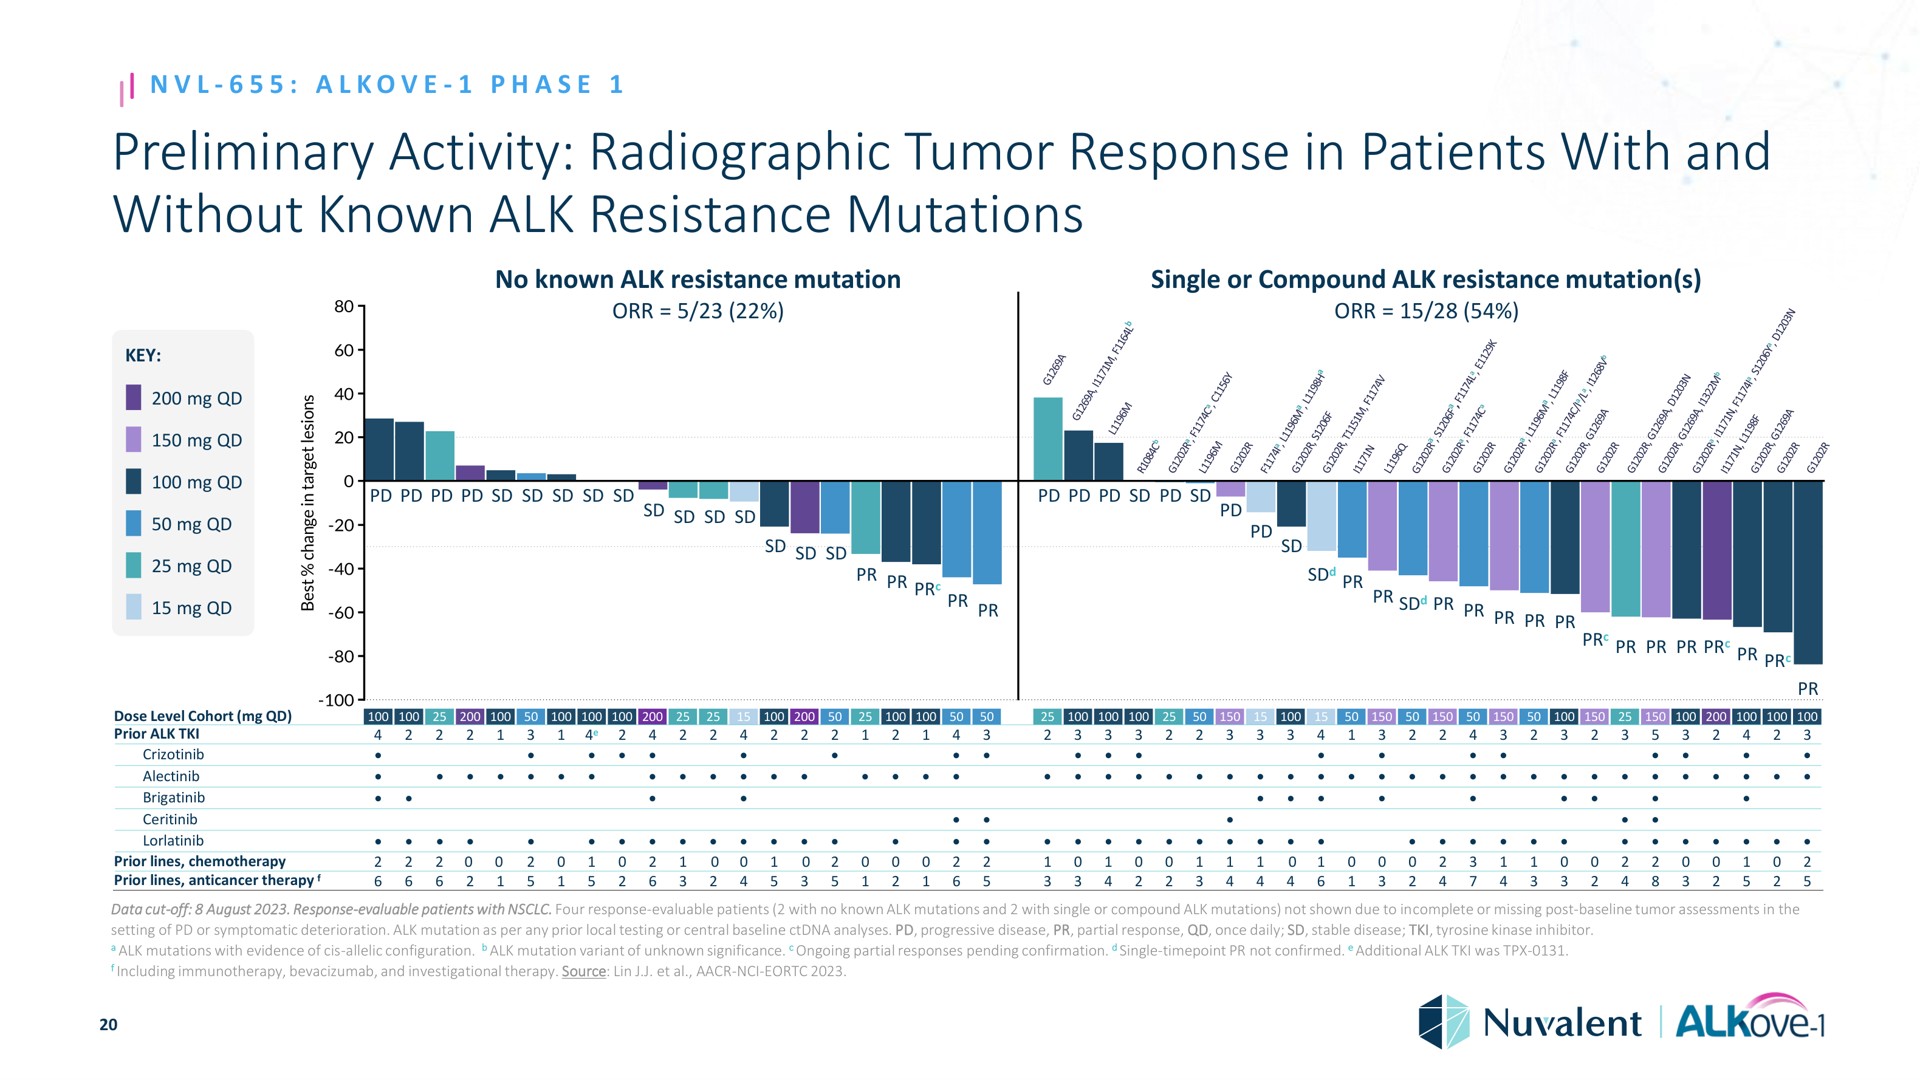 preliminary activity radiographic tumor response in patients with and without known alk resistance mutations phase no mutation single or compound mutation a key i dose level cohort prior a prior lines chemotherapy prior lines anticancer therapy data cut off august response evaluable four response evaluable no single or compound not shown due to incomplete or missing post assessments the setting of or symptomatic deterioration mutation as per any prior local testing or central analyses progressive disease partial once daily stable disease tyrosine kinase inhibitor evidence of allelic configuration mutation variant of unknown significance ongoing partial responses pending confirmation single not confirmed additional was including investigational therapy source lin i i | Nuvalent